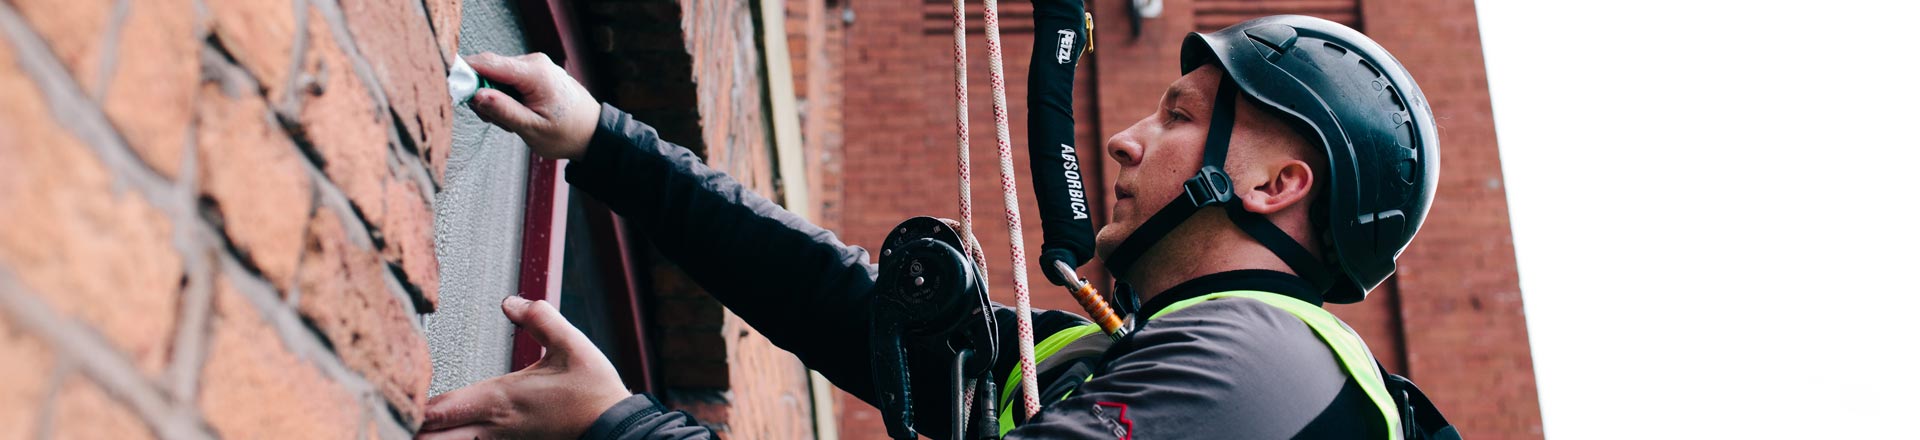 Abseiling/Rope Access Window Cleaning in Sheffield - HCS Cleaning Services